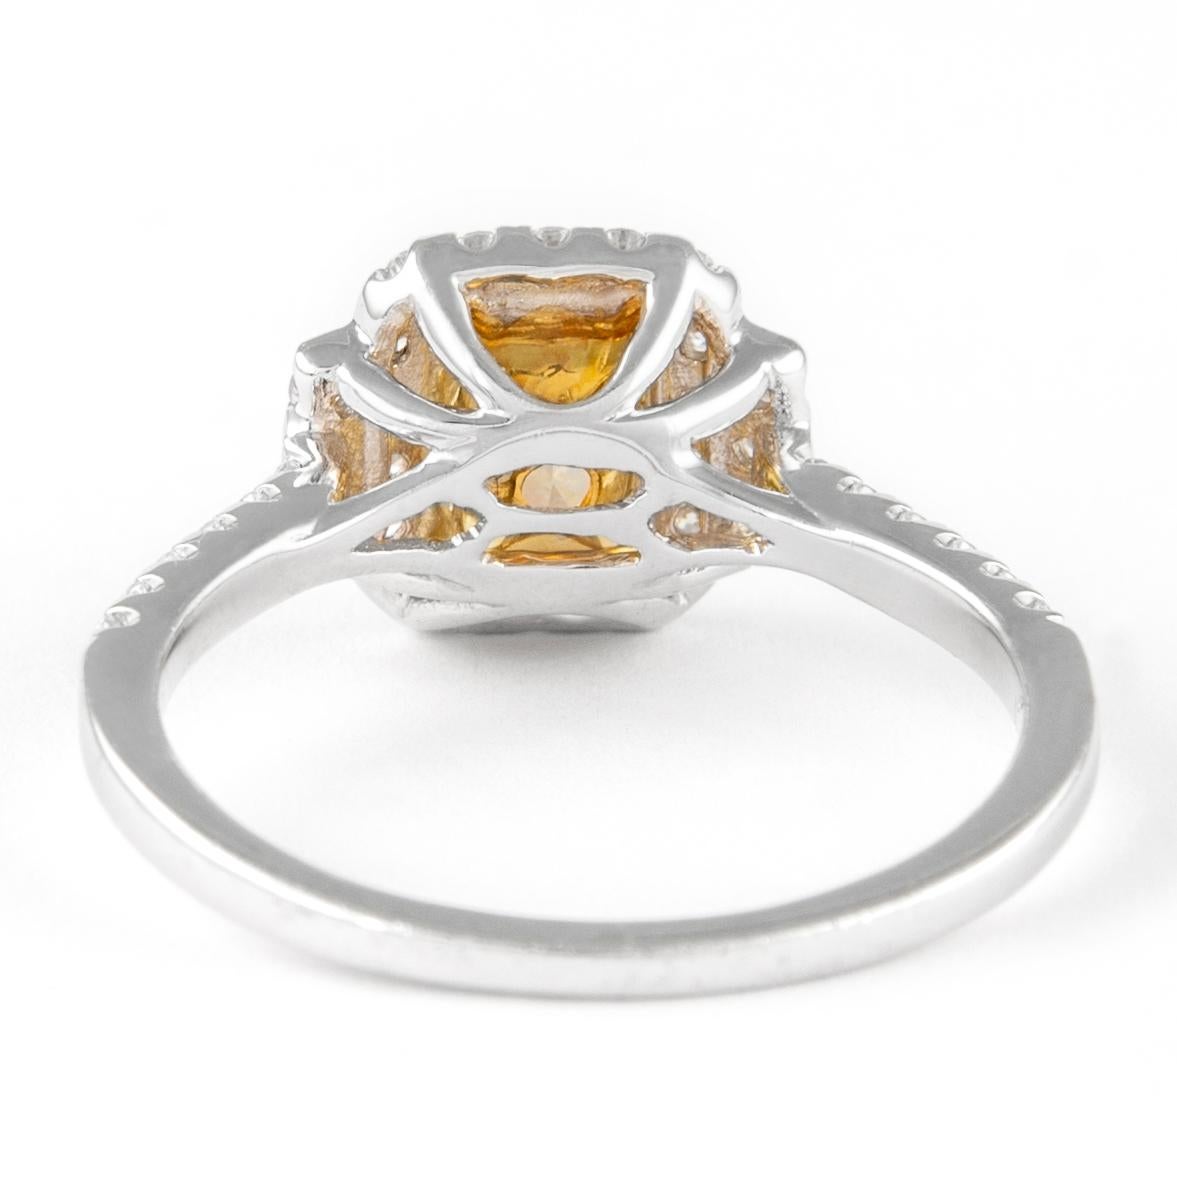 Alexander 1.39ctt Fancy Yellow VS2 Cushion Diamond with Halo Ring 18k Two Tone In New Condition For Sale In BEVERLY HILLS, CA